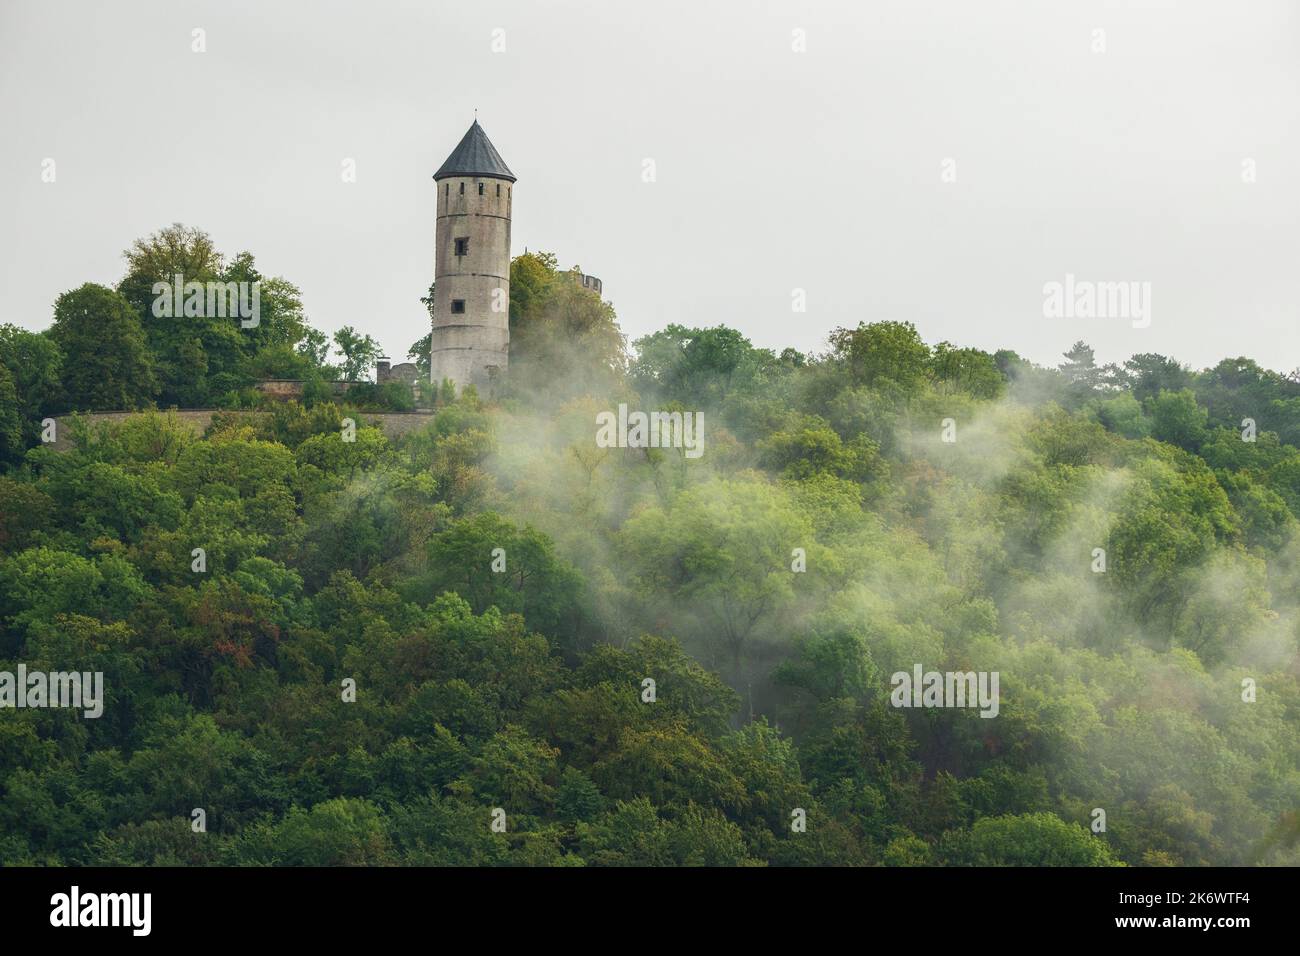 Burgurine on wooded mountain with rising rain clouds, Plesse Castle Stock Photo